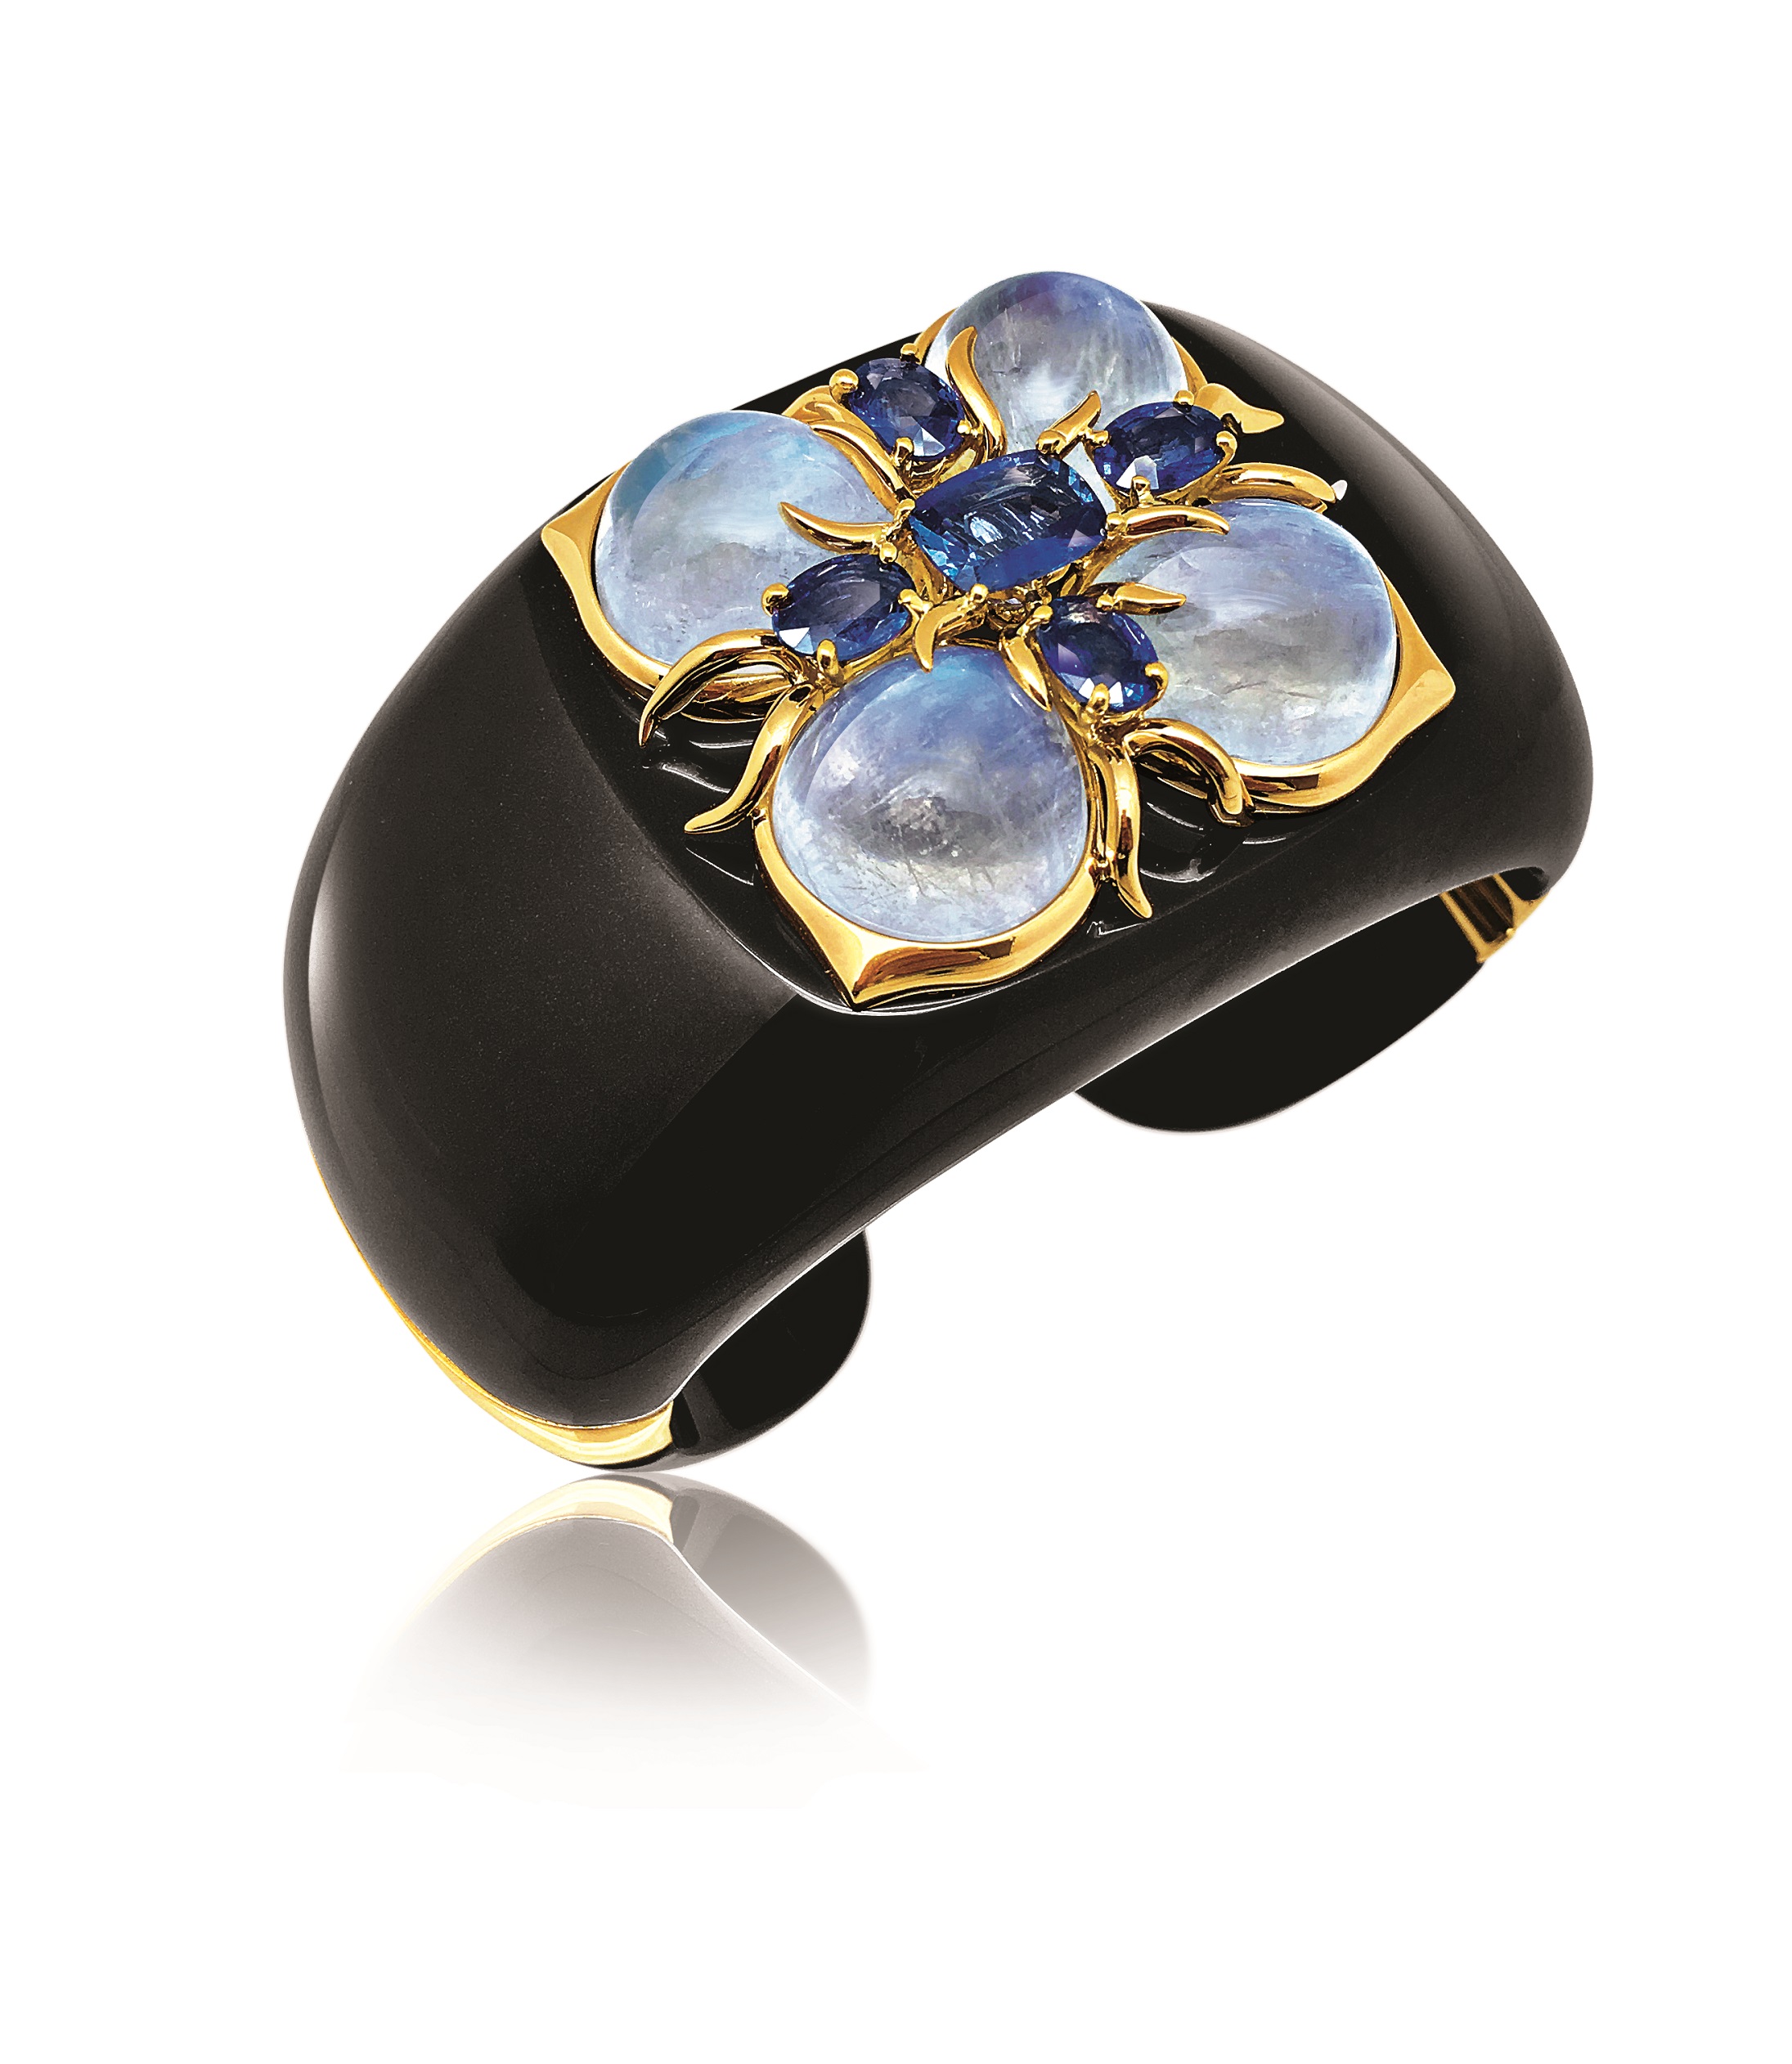 tefaf VERDURA Dogwood Cuff with Moonstones and Sapphires